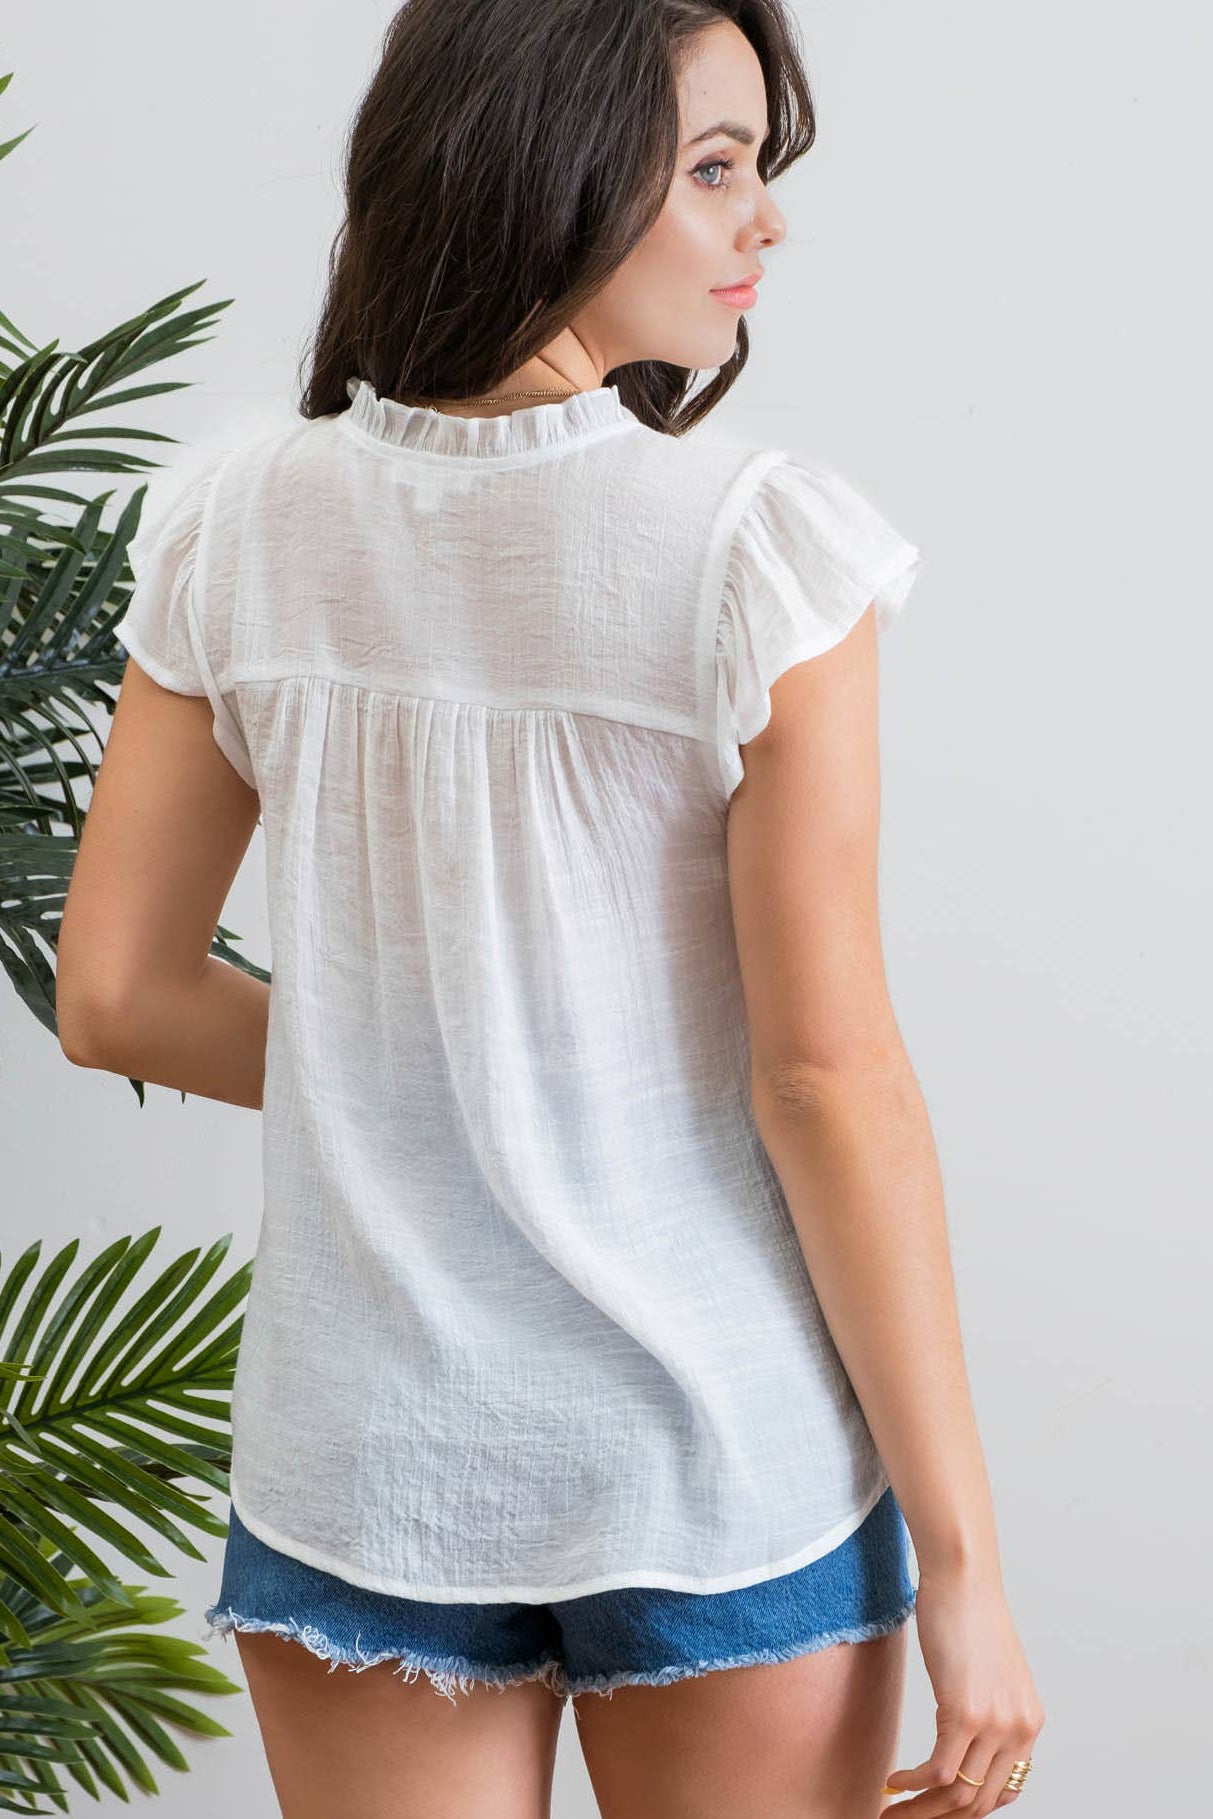 Neck Tie Embroidered Top